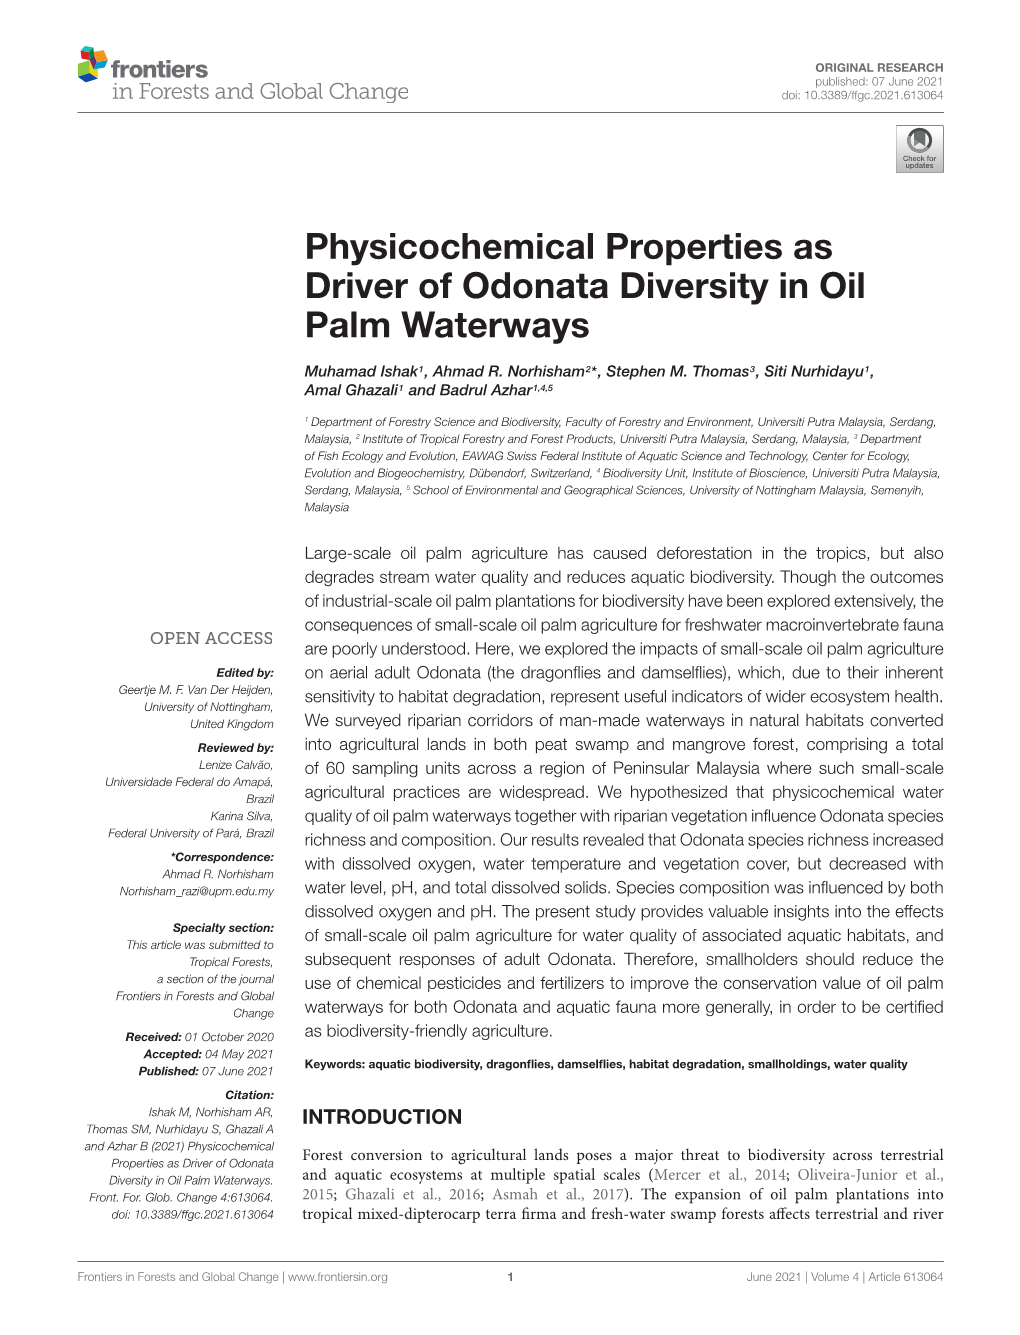 Physicochemical Properties As Driver of Odonata Diversity in Oil Palm Waterways